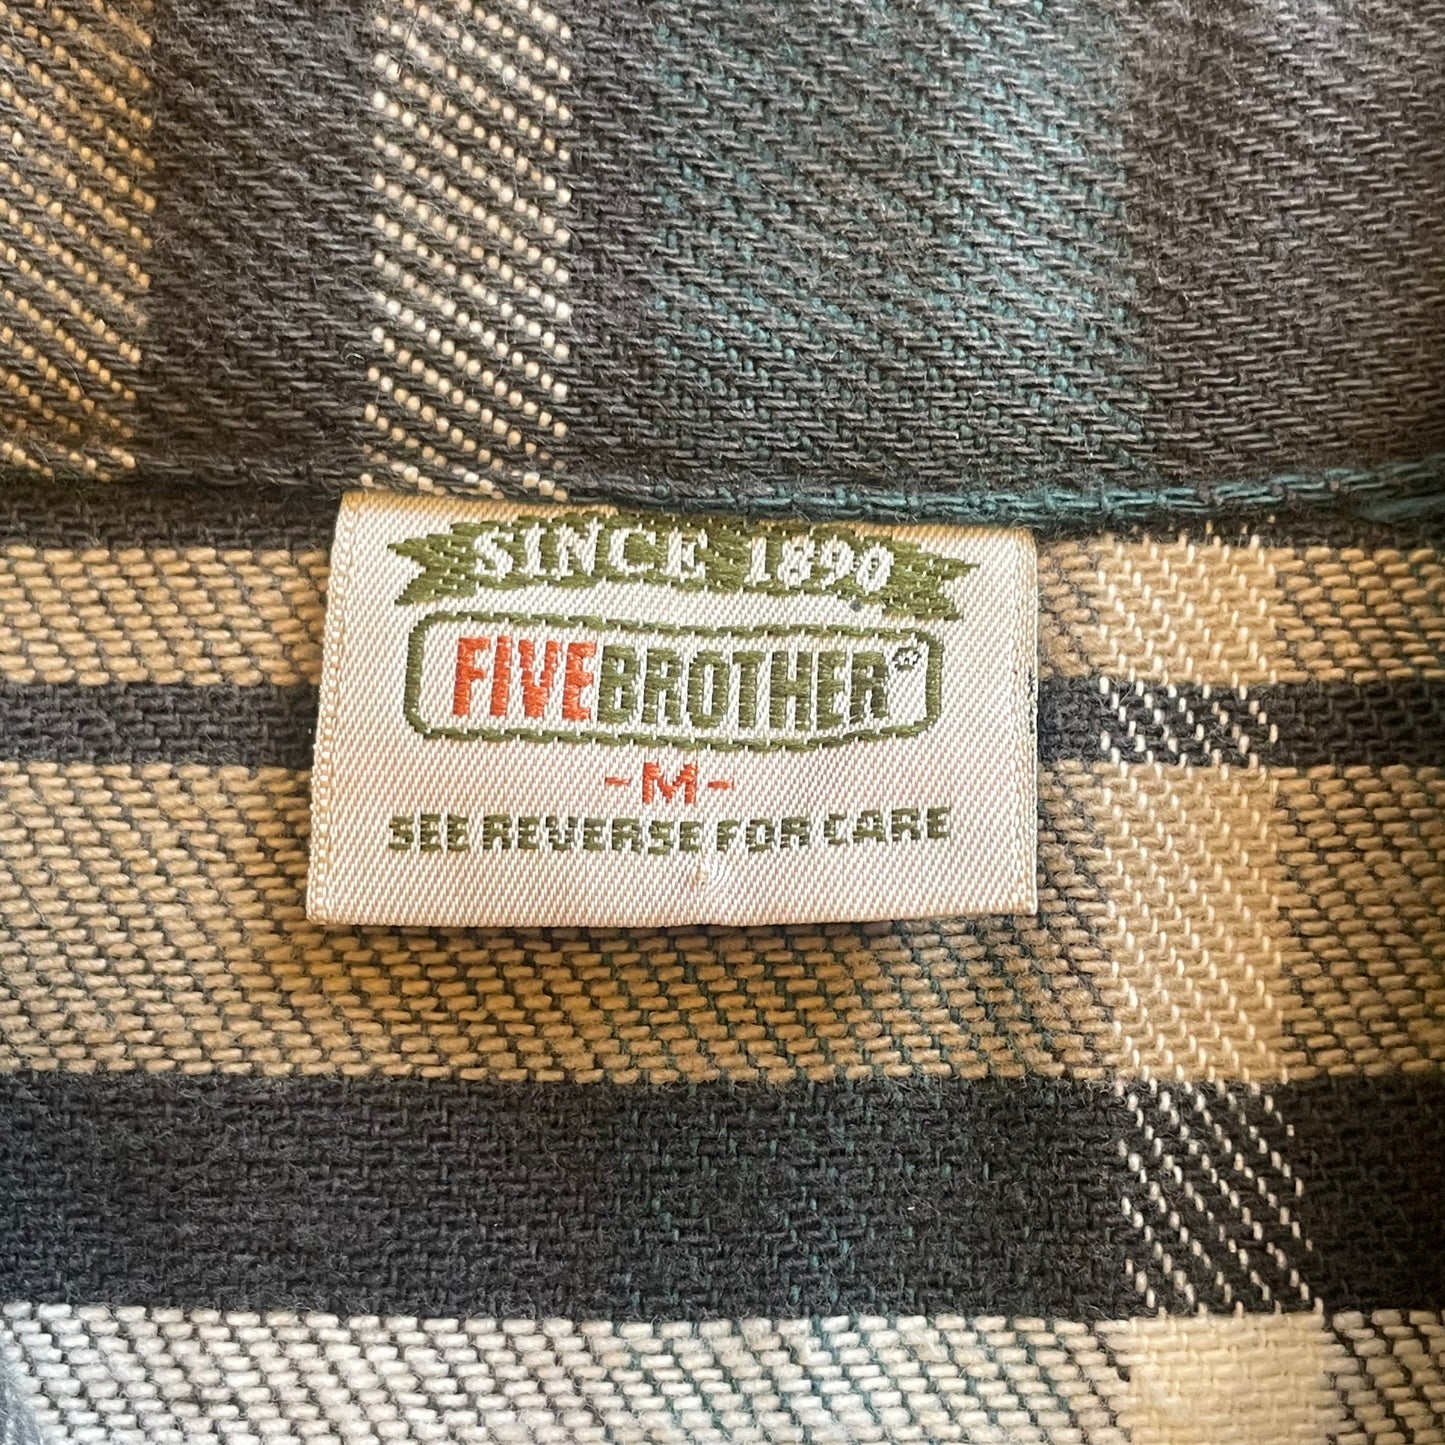 "90’s FIVE BROTHER” cotton flannel check shirt　M